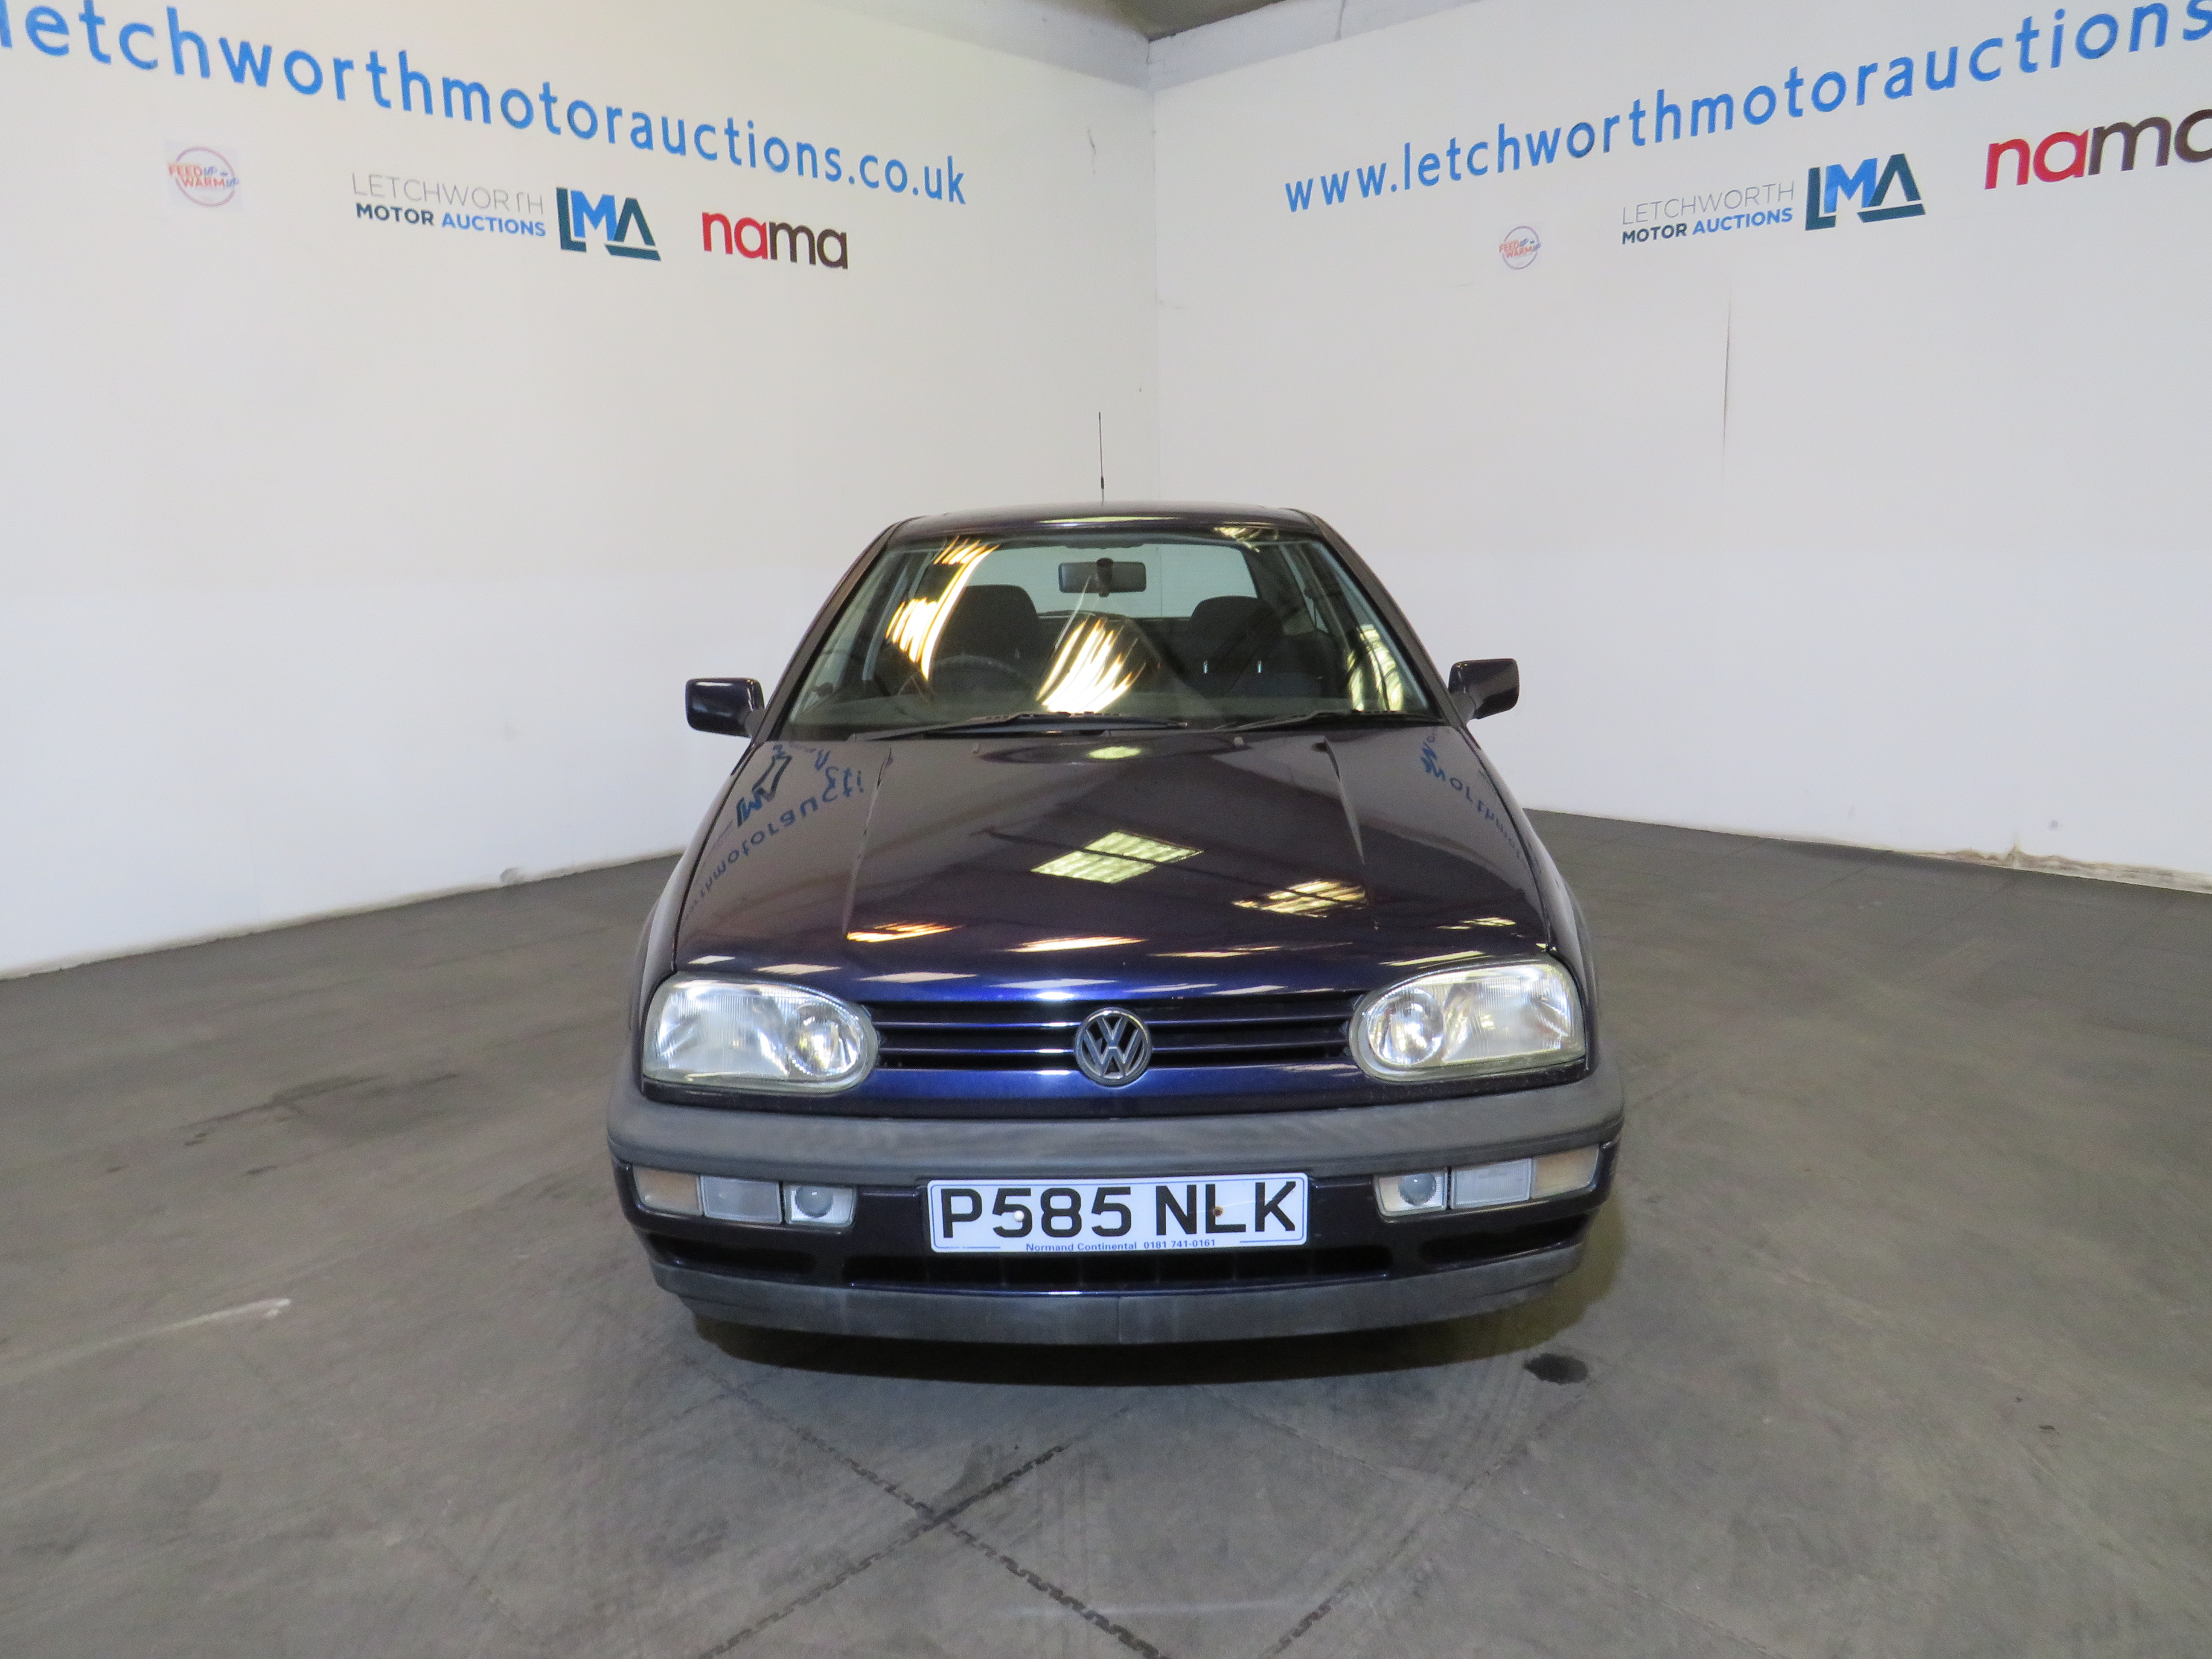 1997 Volkswagen Golf GTI - 1984cc - ONE OWNER FROM NEW - Image 2 of 20